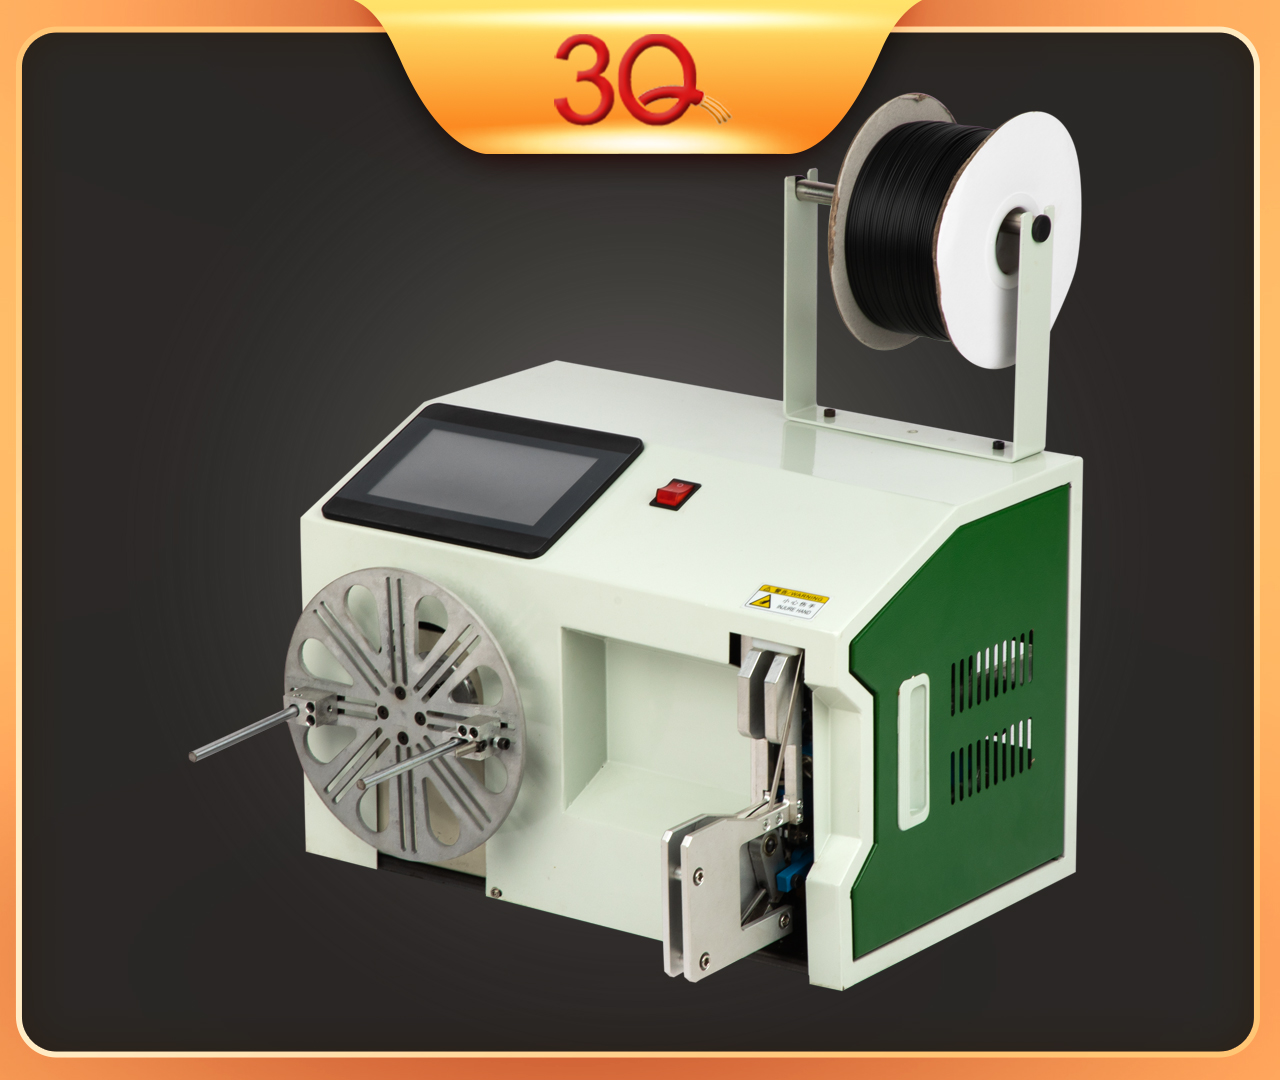 3QMachine Automatic Cable Winding And Binding Machine